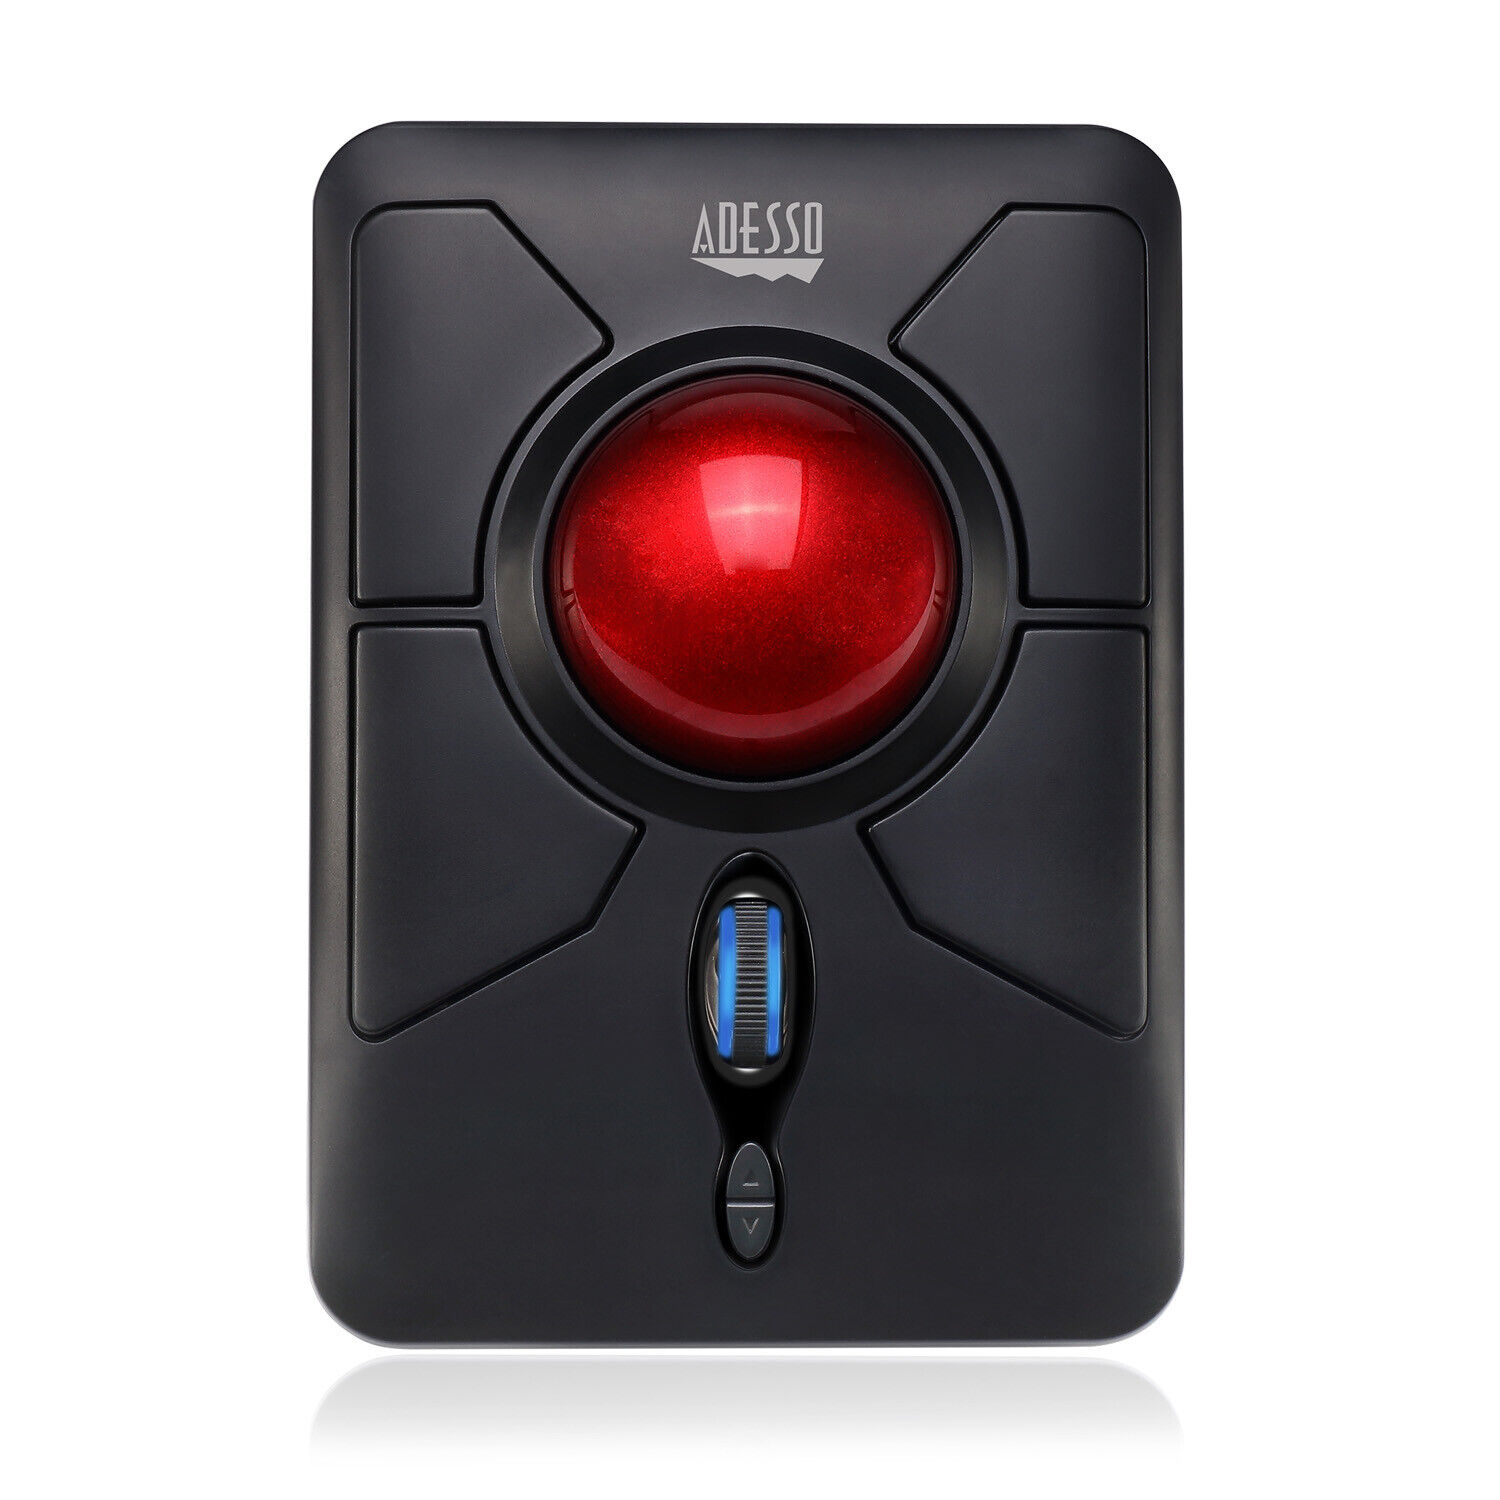 Adesso iMouse T50 Wireless Trackball Optical Programmable Mouse